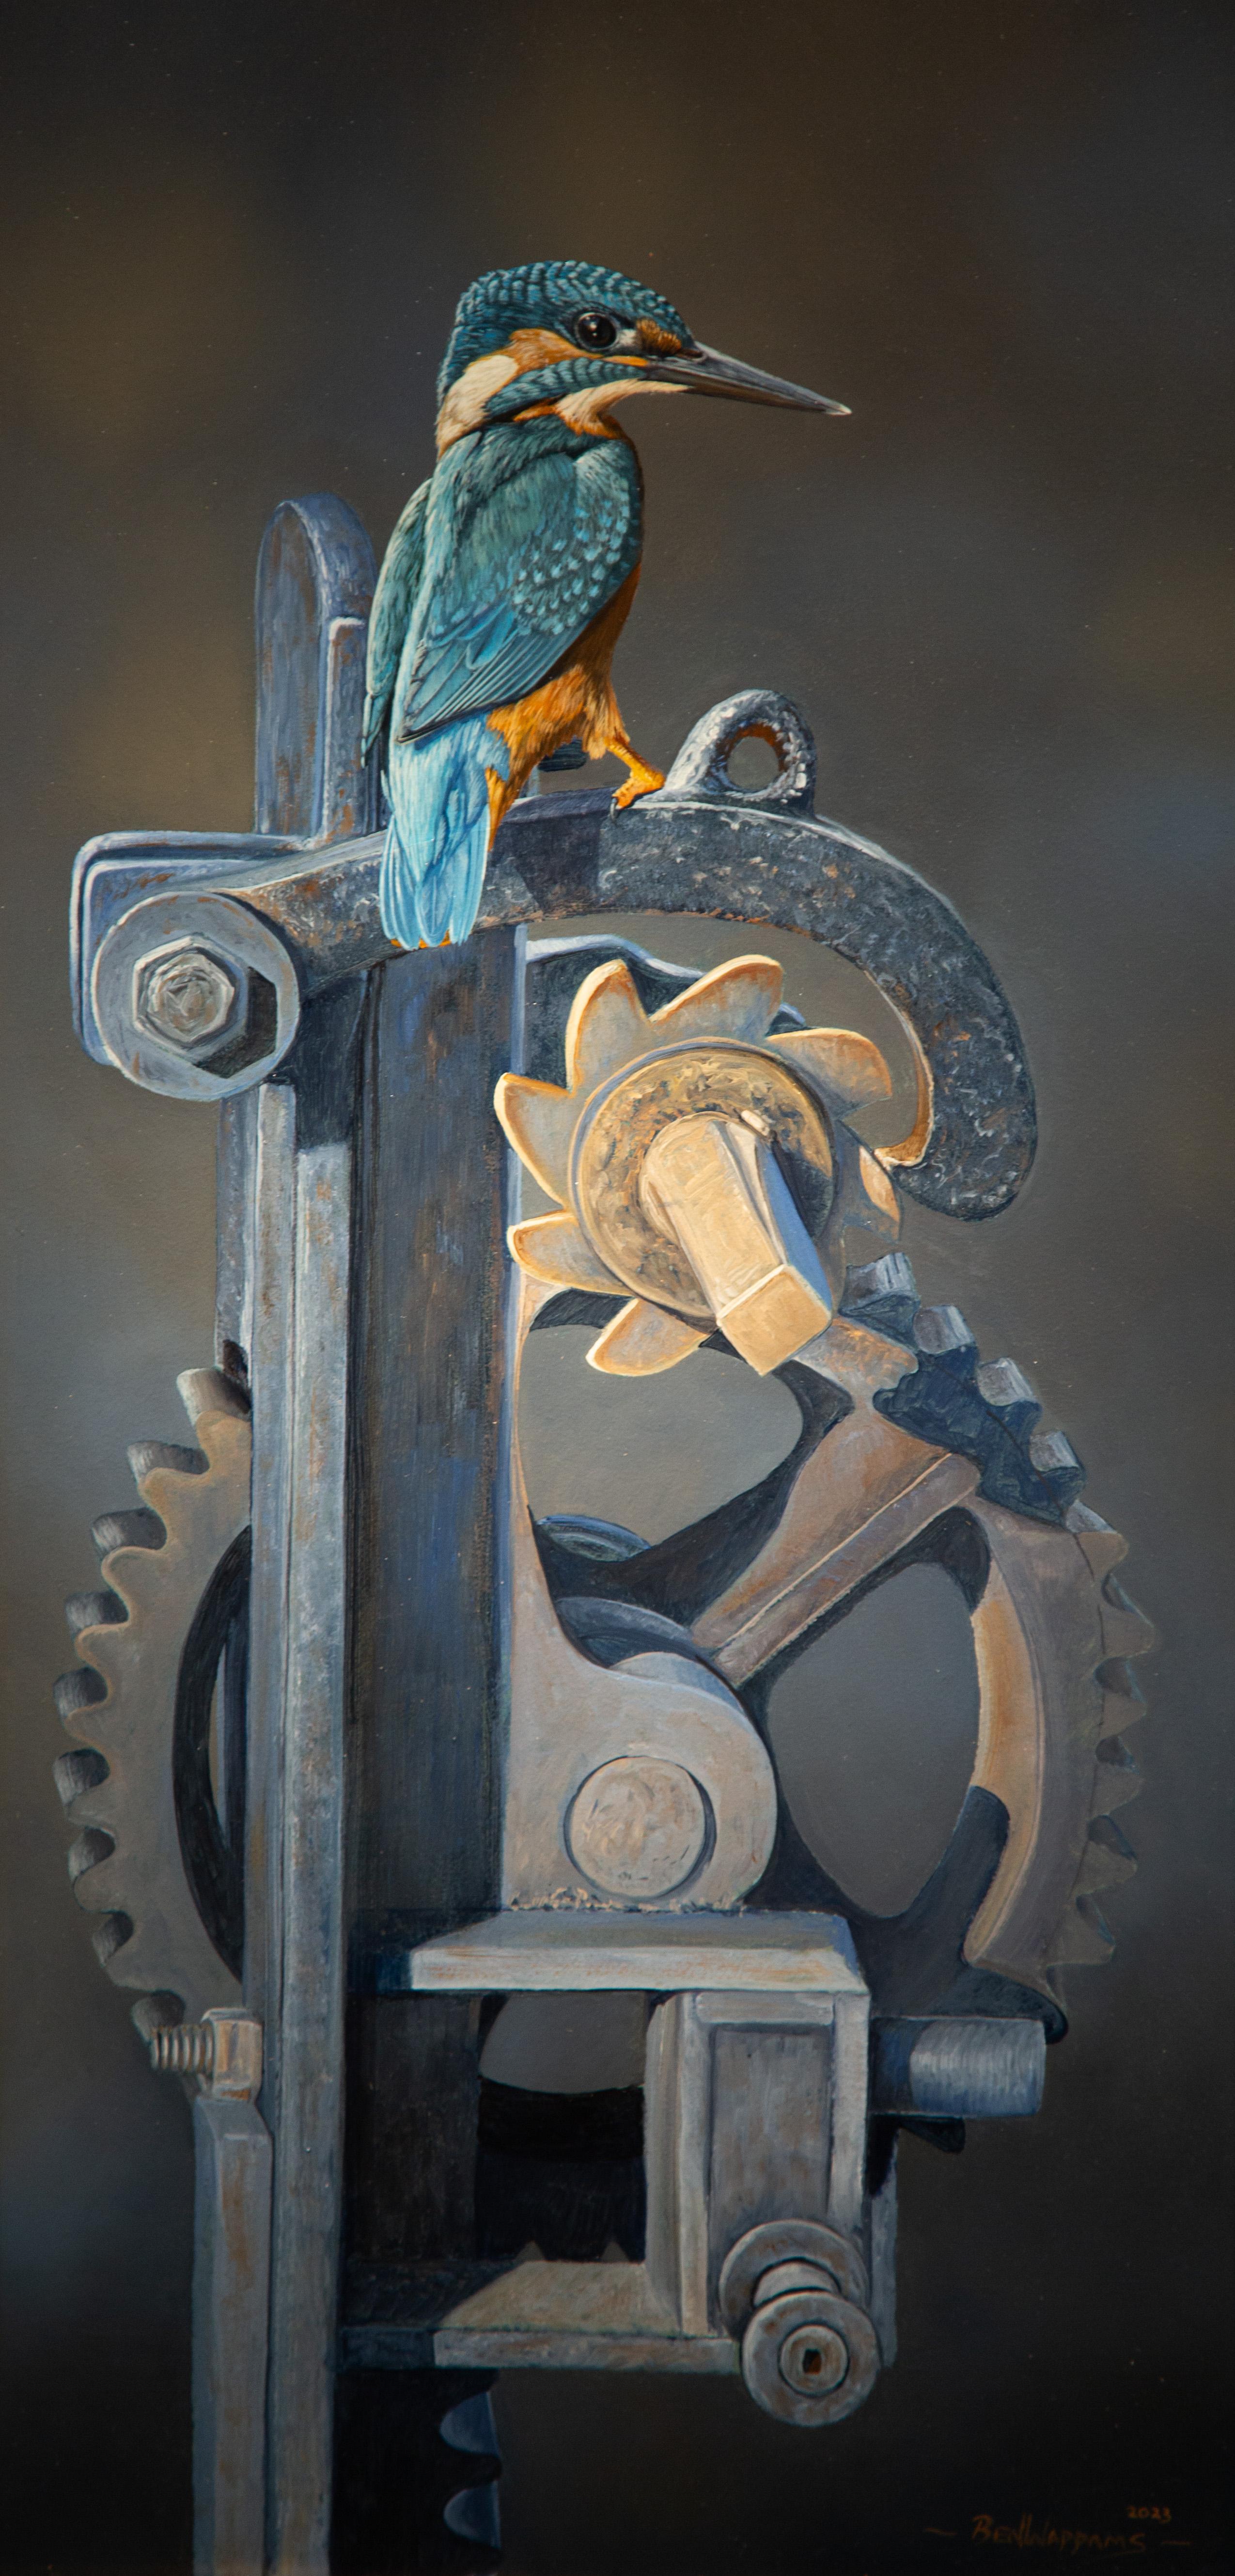 'Kingfisher' Photorealist painting of a small blue bird on a lock gate, vivid